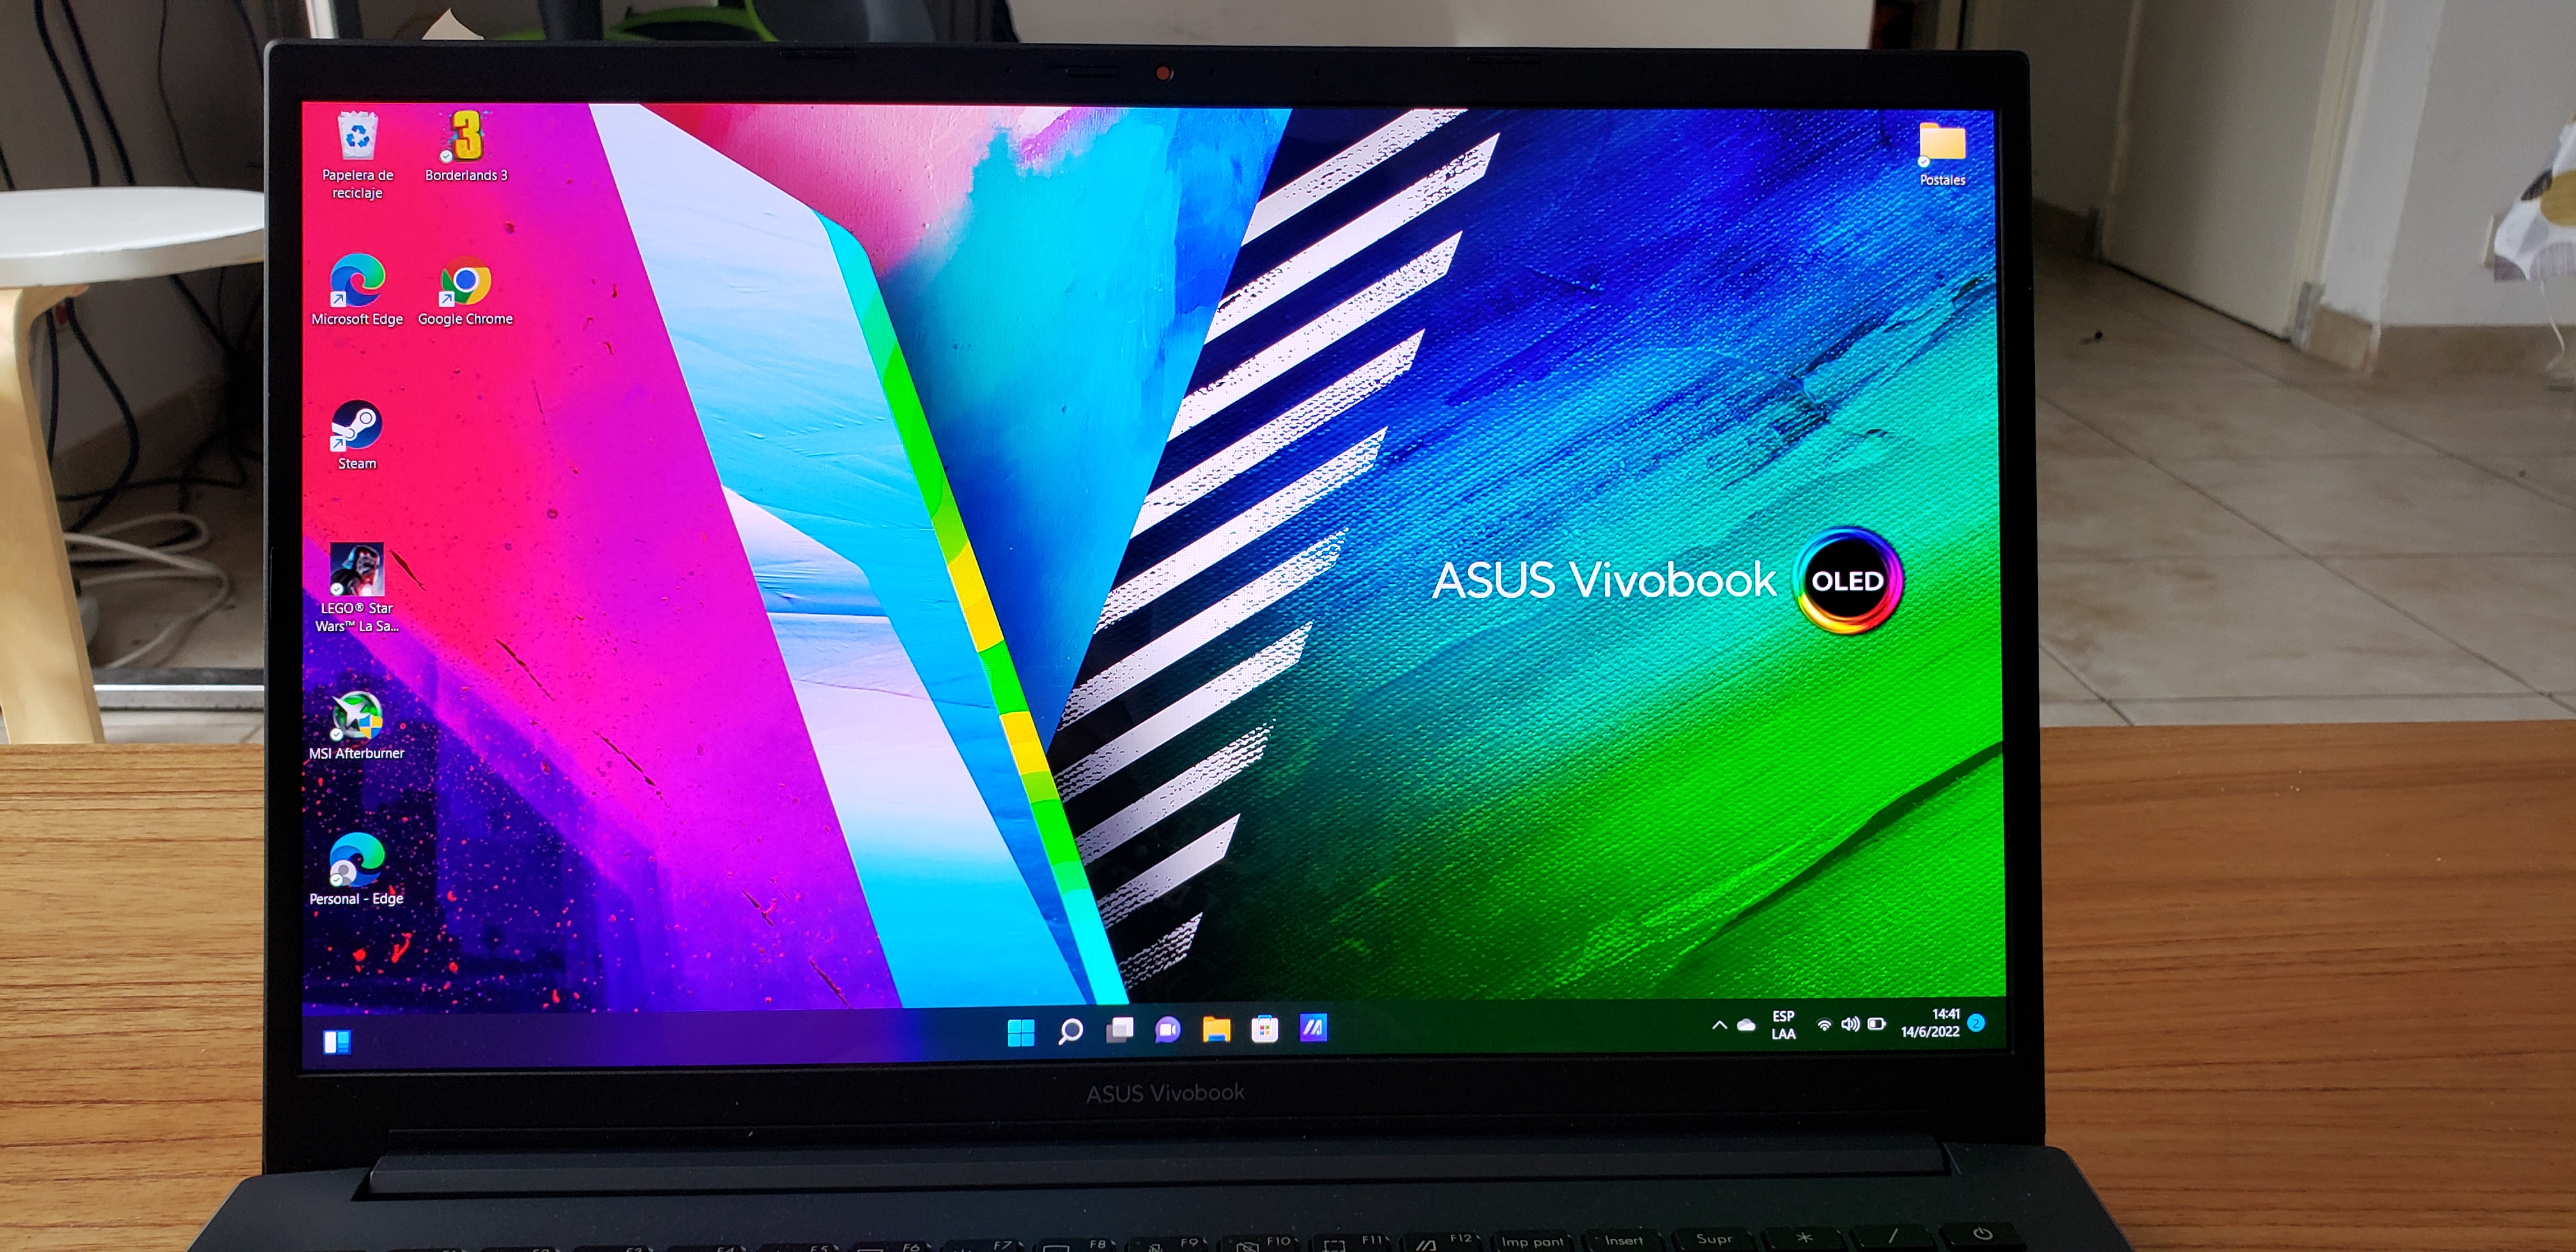 Asus Vivobook Pro 15 OLED (M3500Q) REVIEW: A Computer For Designers And Gamers?